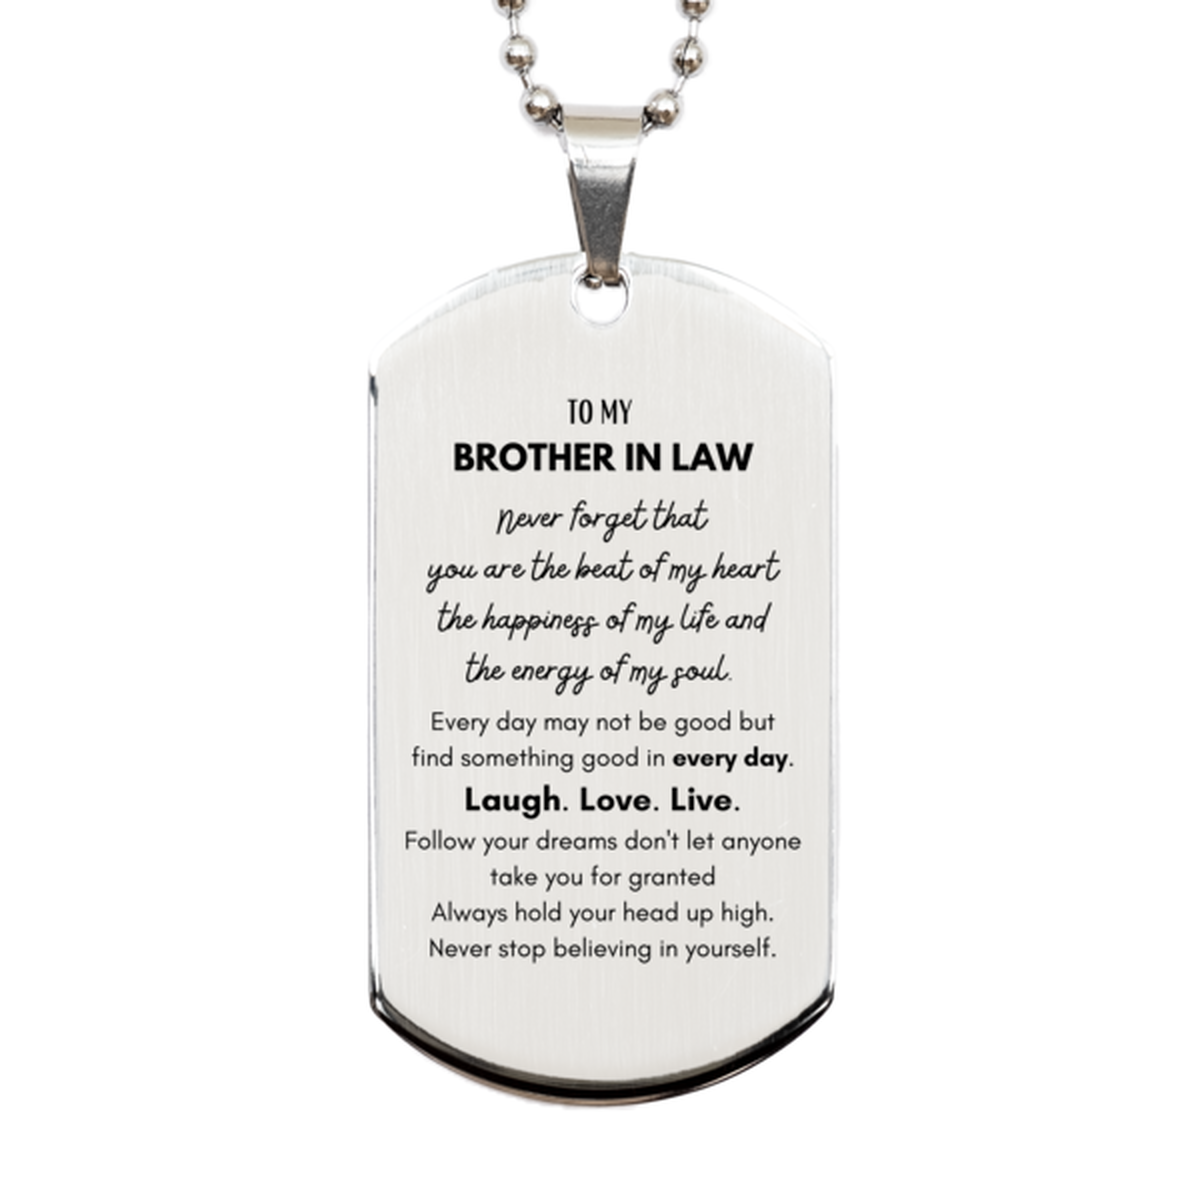 To My Brother In Law Dogtag Gifts, Christmas Brother In Law Silver Dog Tag Present, Birthday Unique Motivational For Brother In Law, To My Brother In Law Never forget that you are the beat of my heart the happiness of my life and the energy of my soul